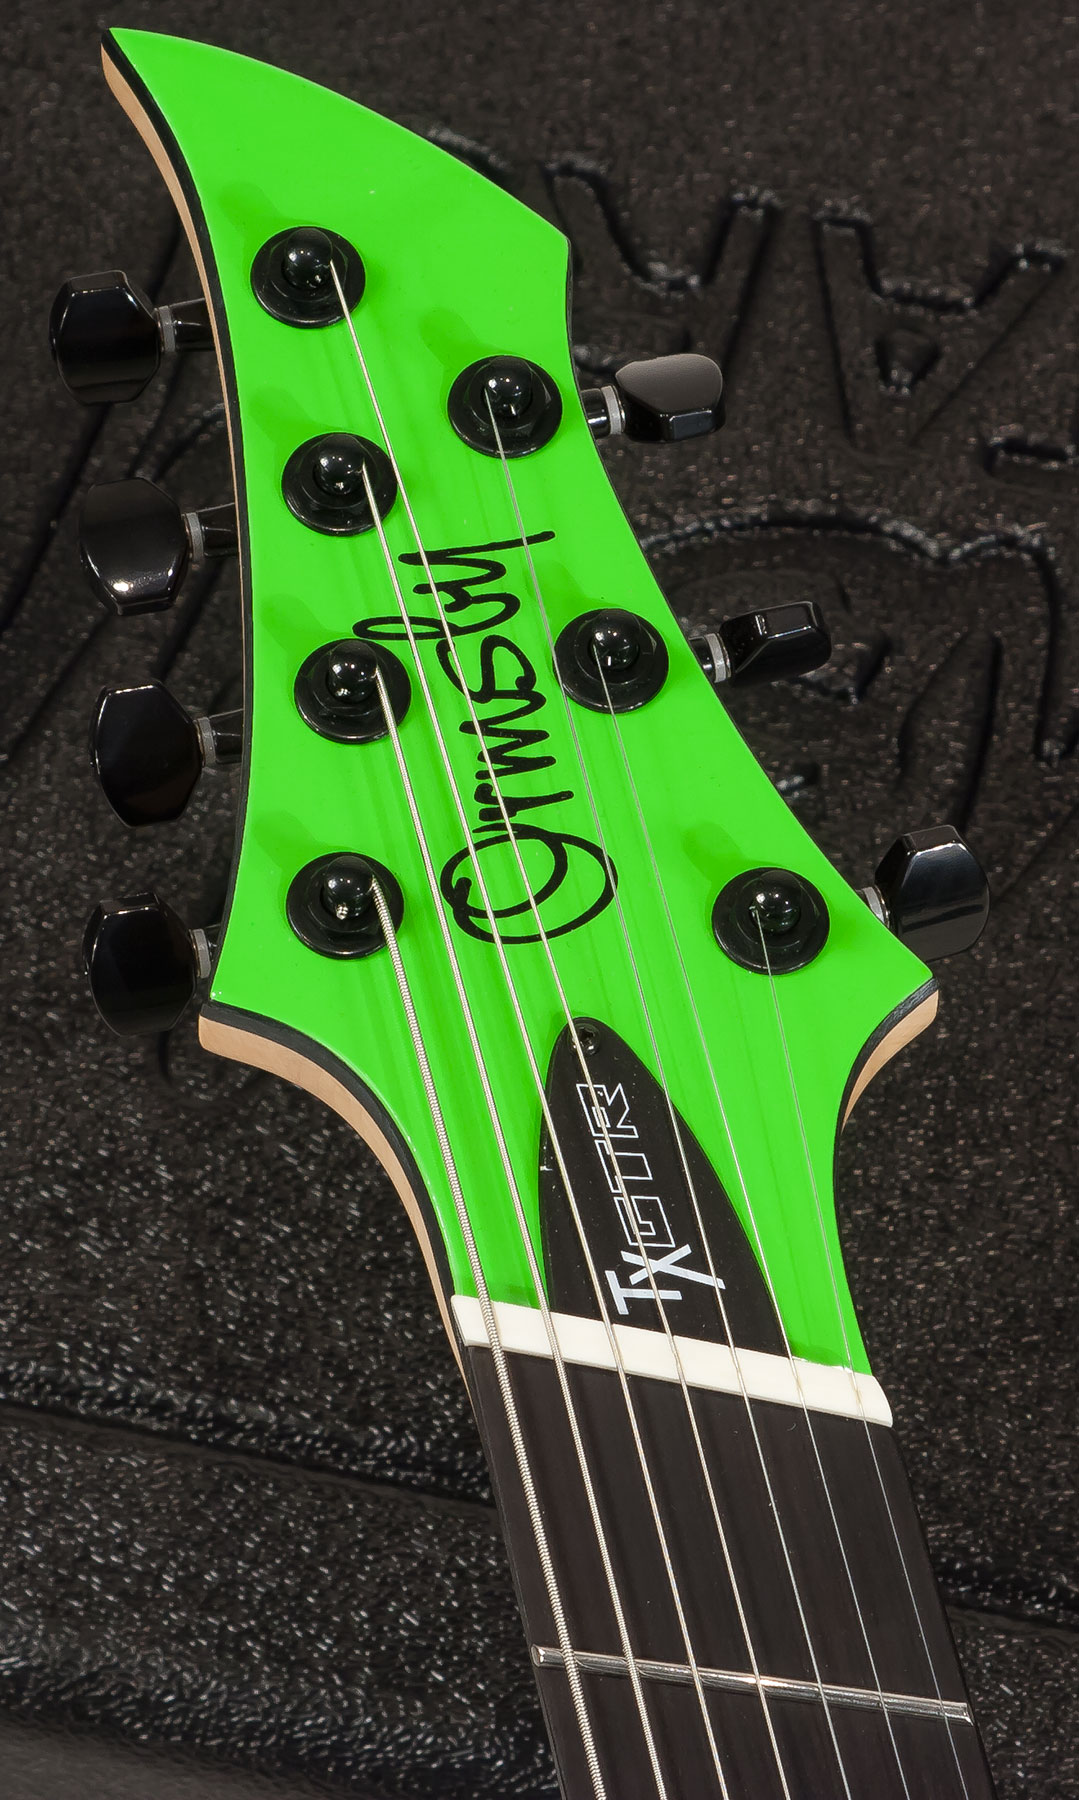 Ormsby Tx Gtr 7 Hs Ht Eb - Chernobyl Green - Guitare Électrique Multi-scale - Variation 4